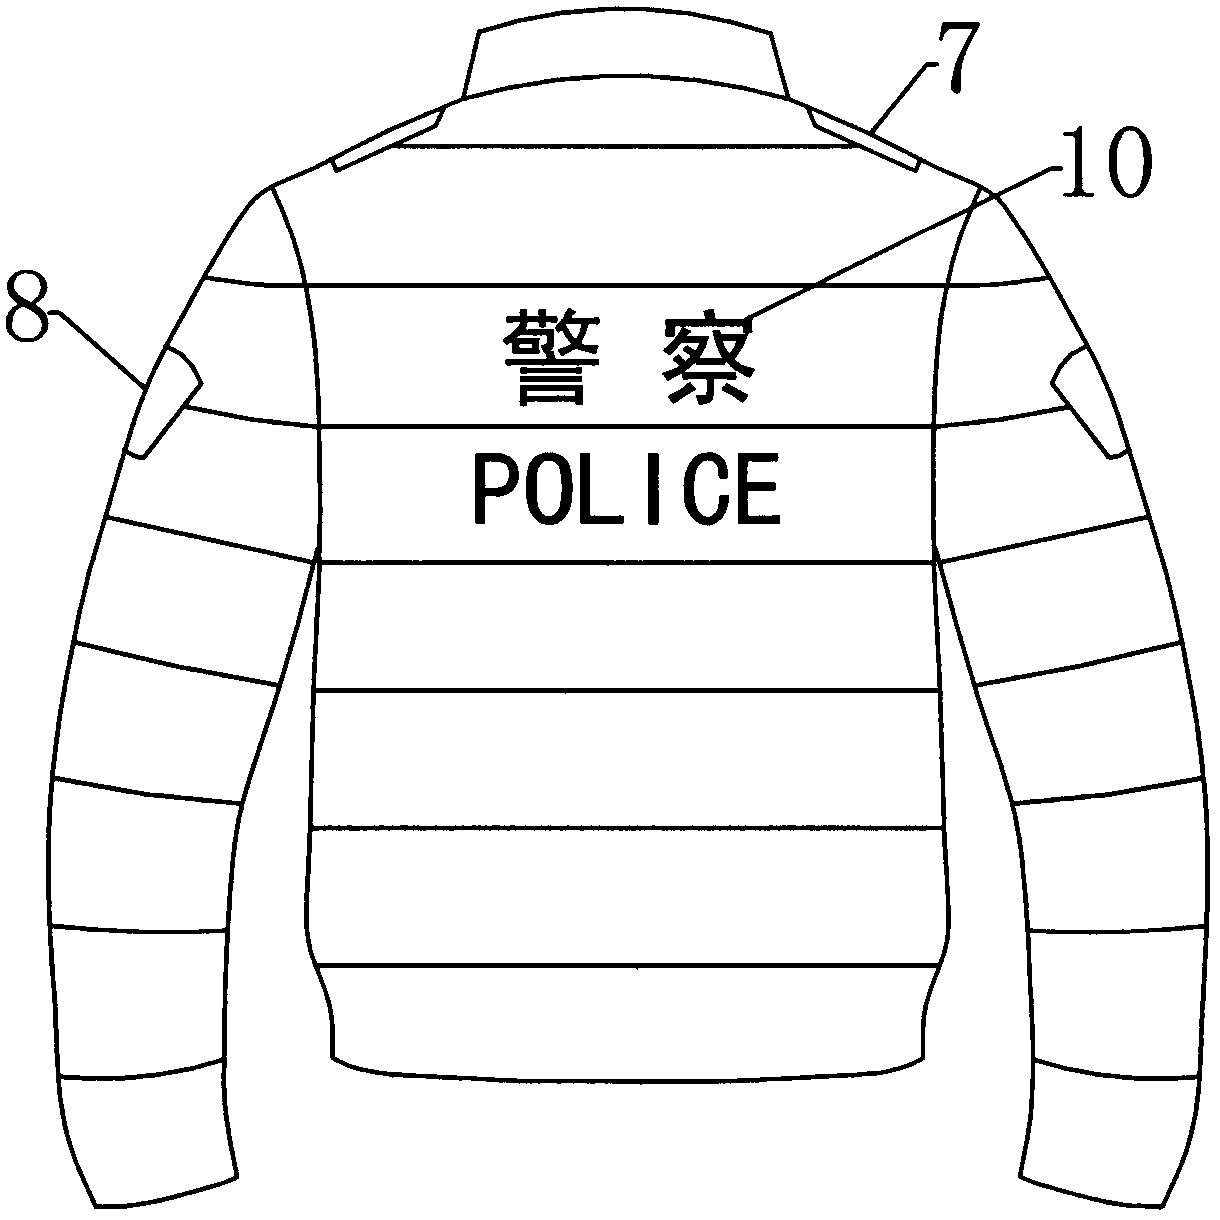 Police down jacket